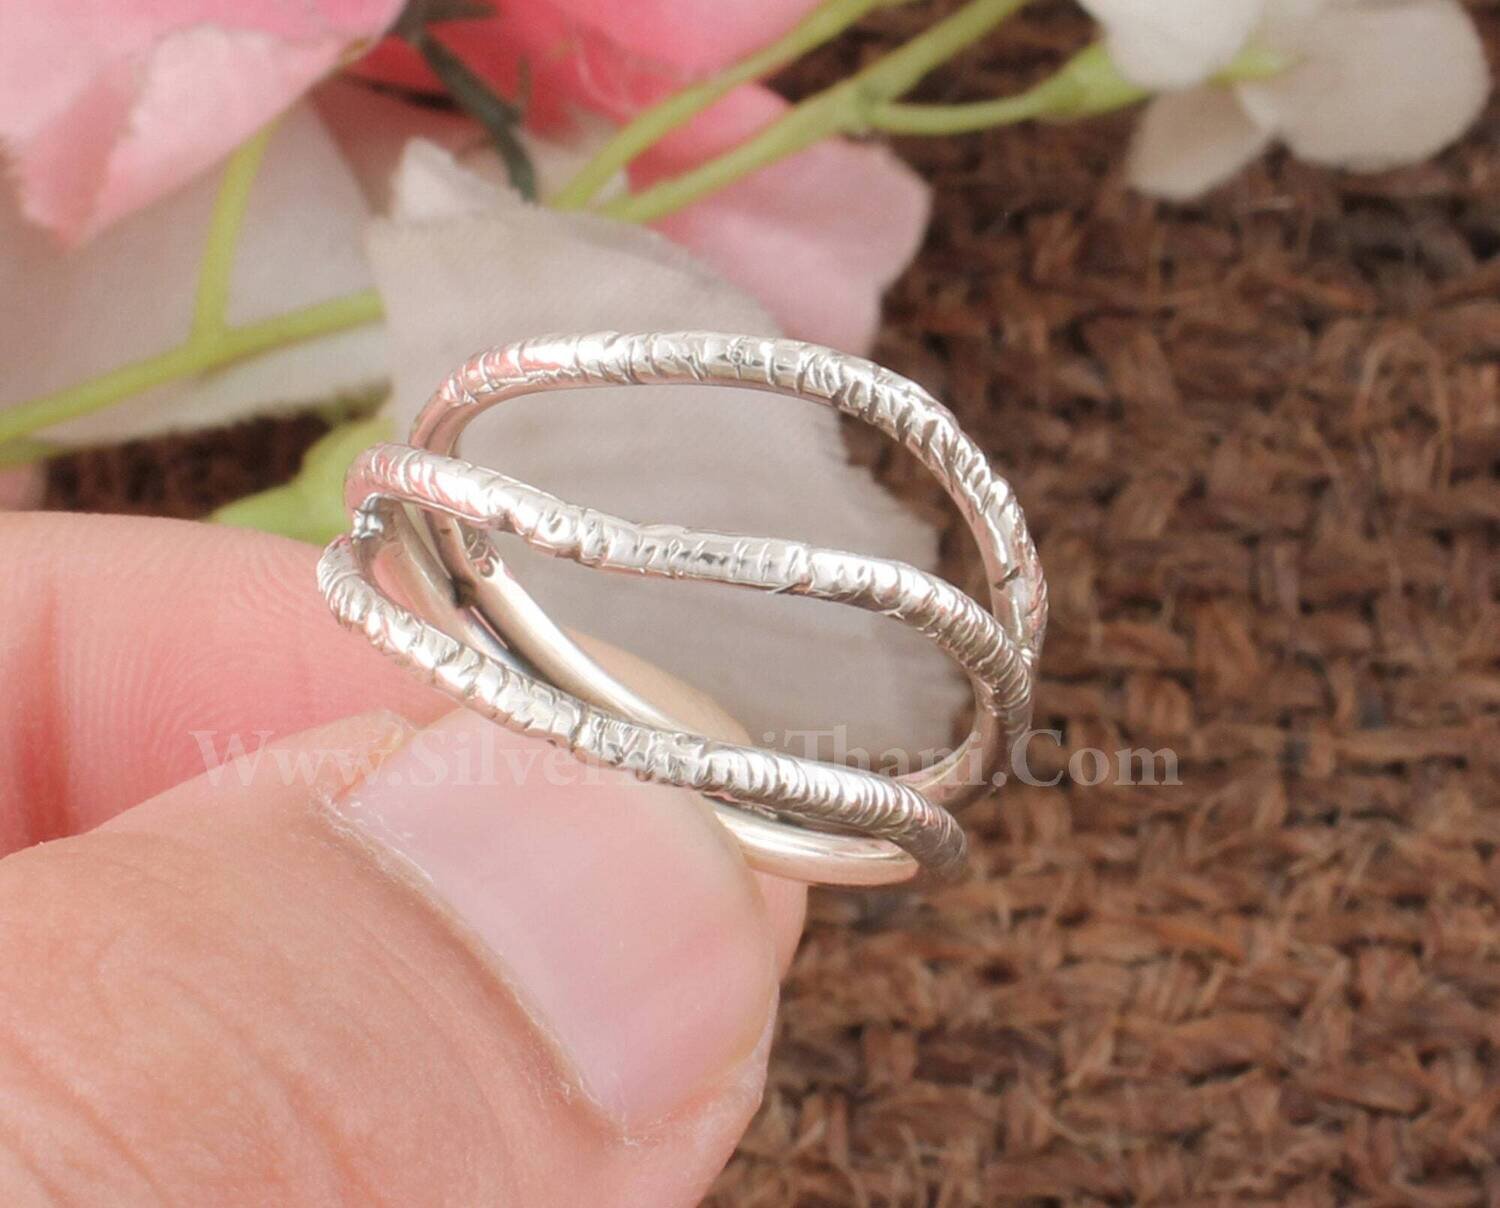 Triple Silver Band  Ring | Triple Band Ring | Handmade Ring | 925 Sterling Silver Ring | Bridal Wedding Jewelry |Hand Carved Ring Gift